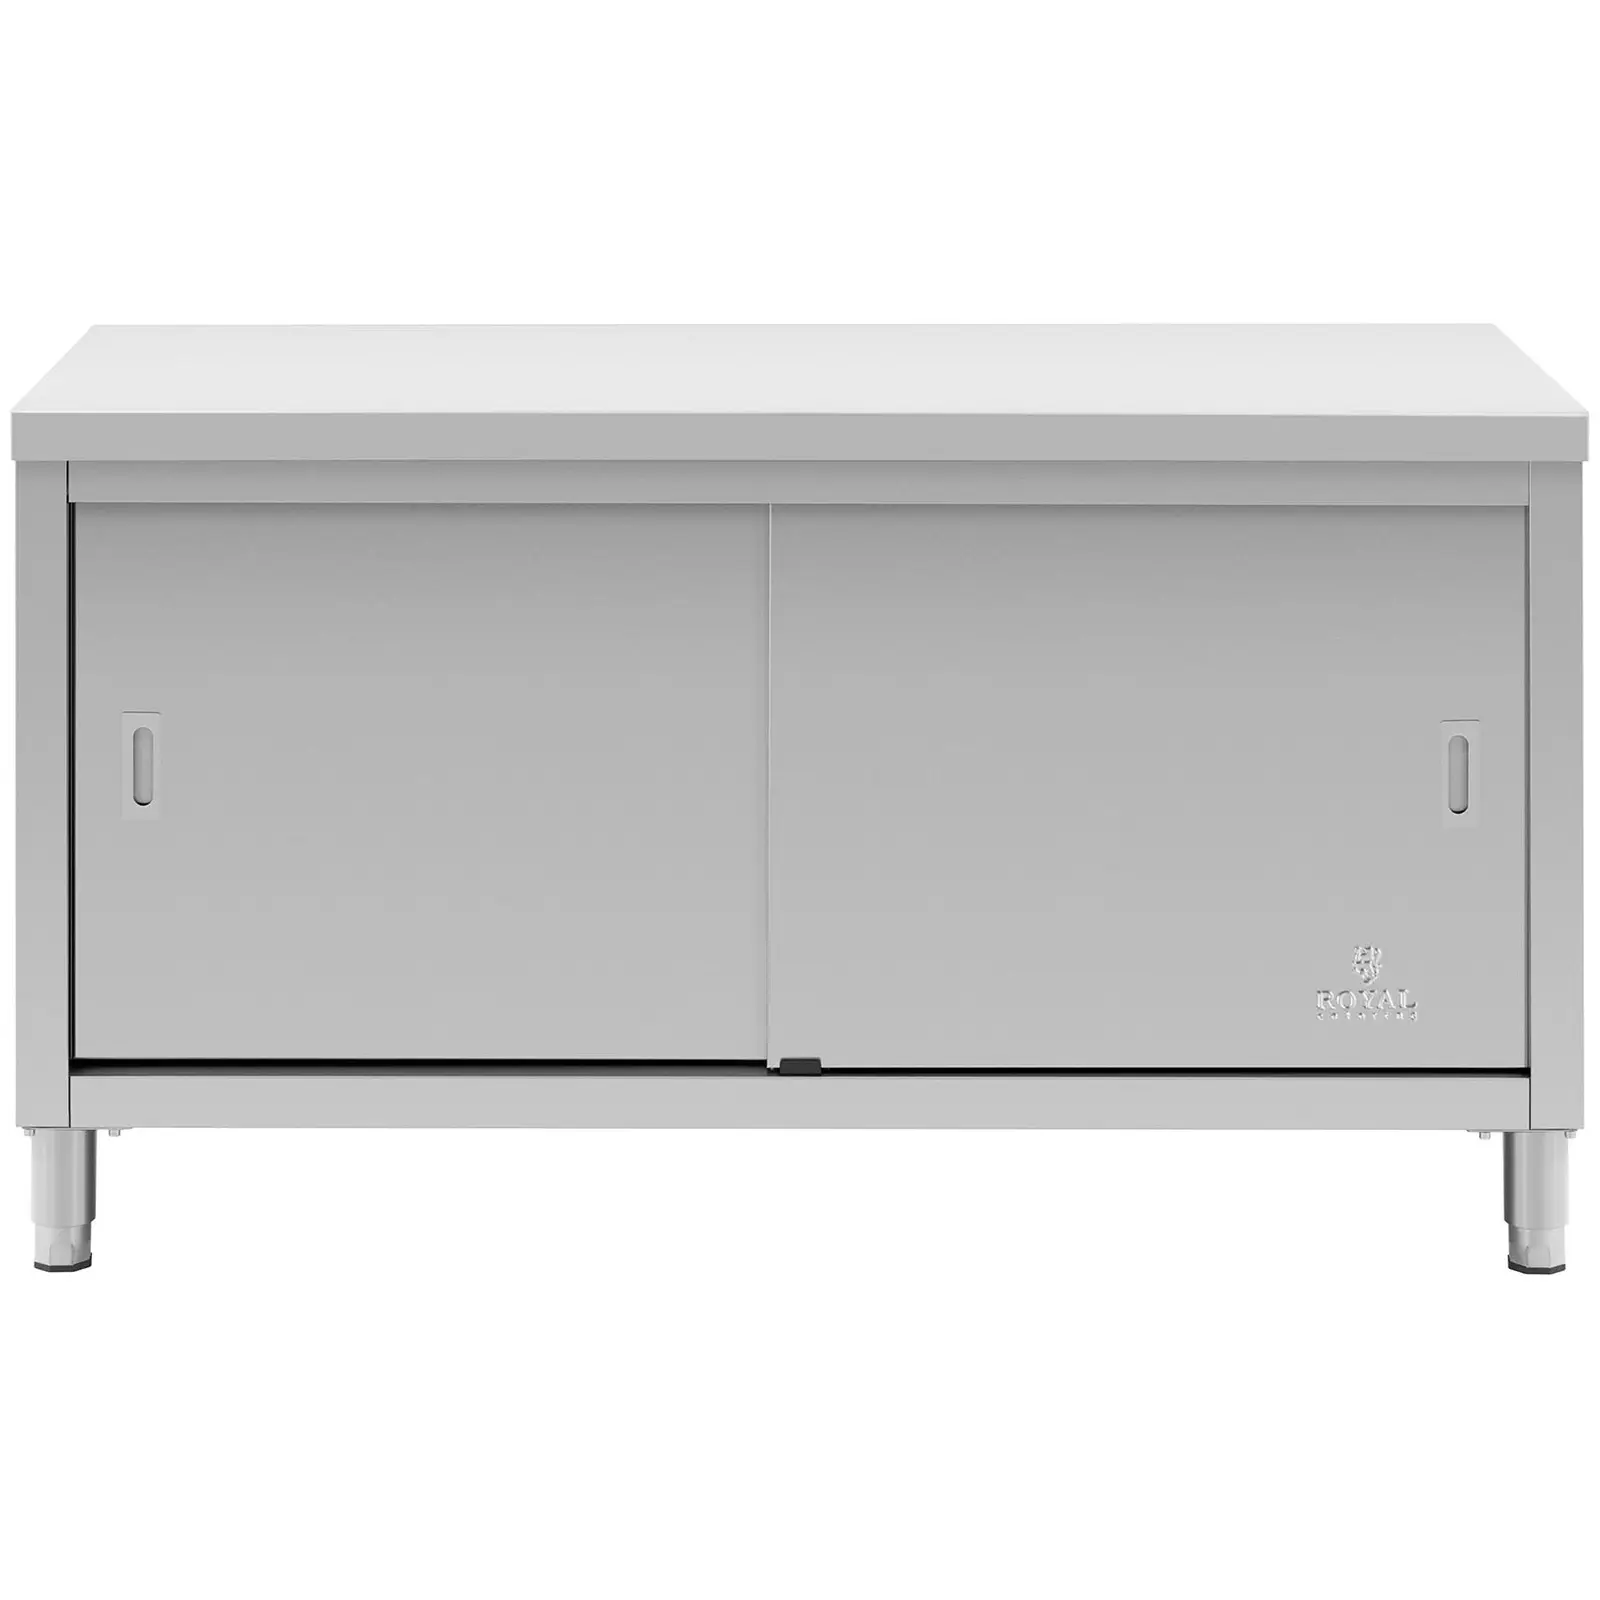 Stainless steel work cabinet - 150 x 70 x 85 cm - 600 kg Load capacity